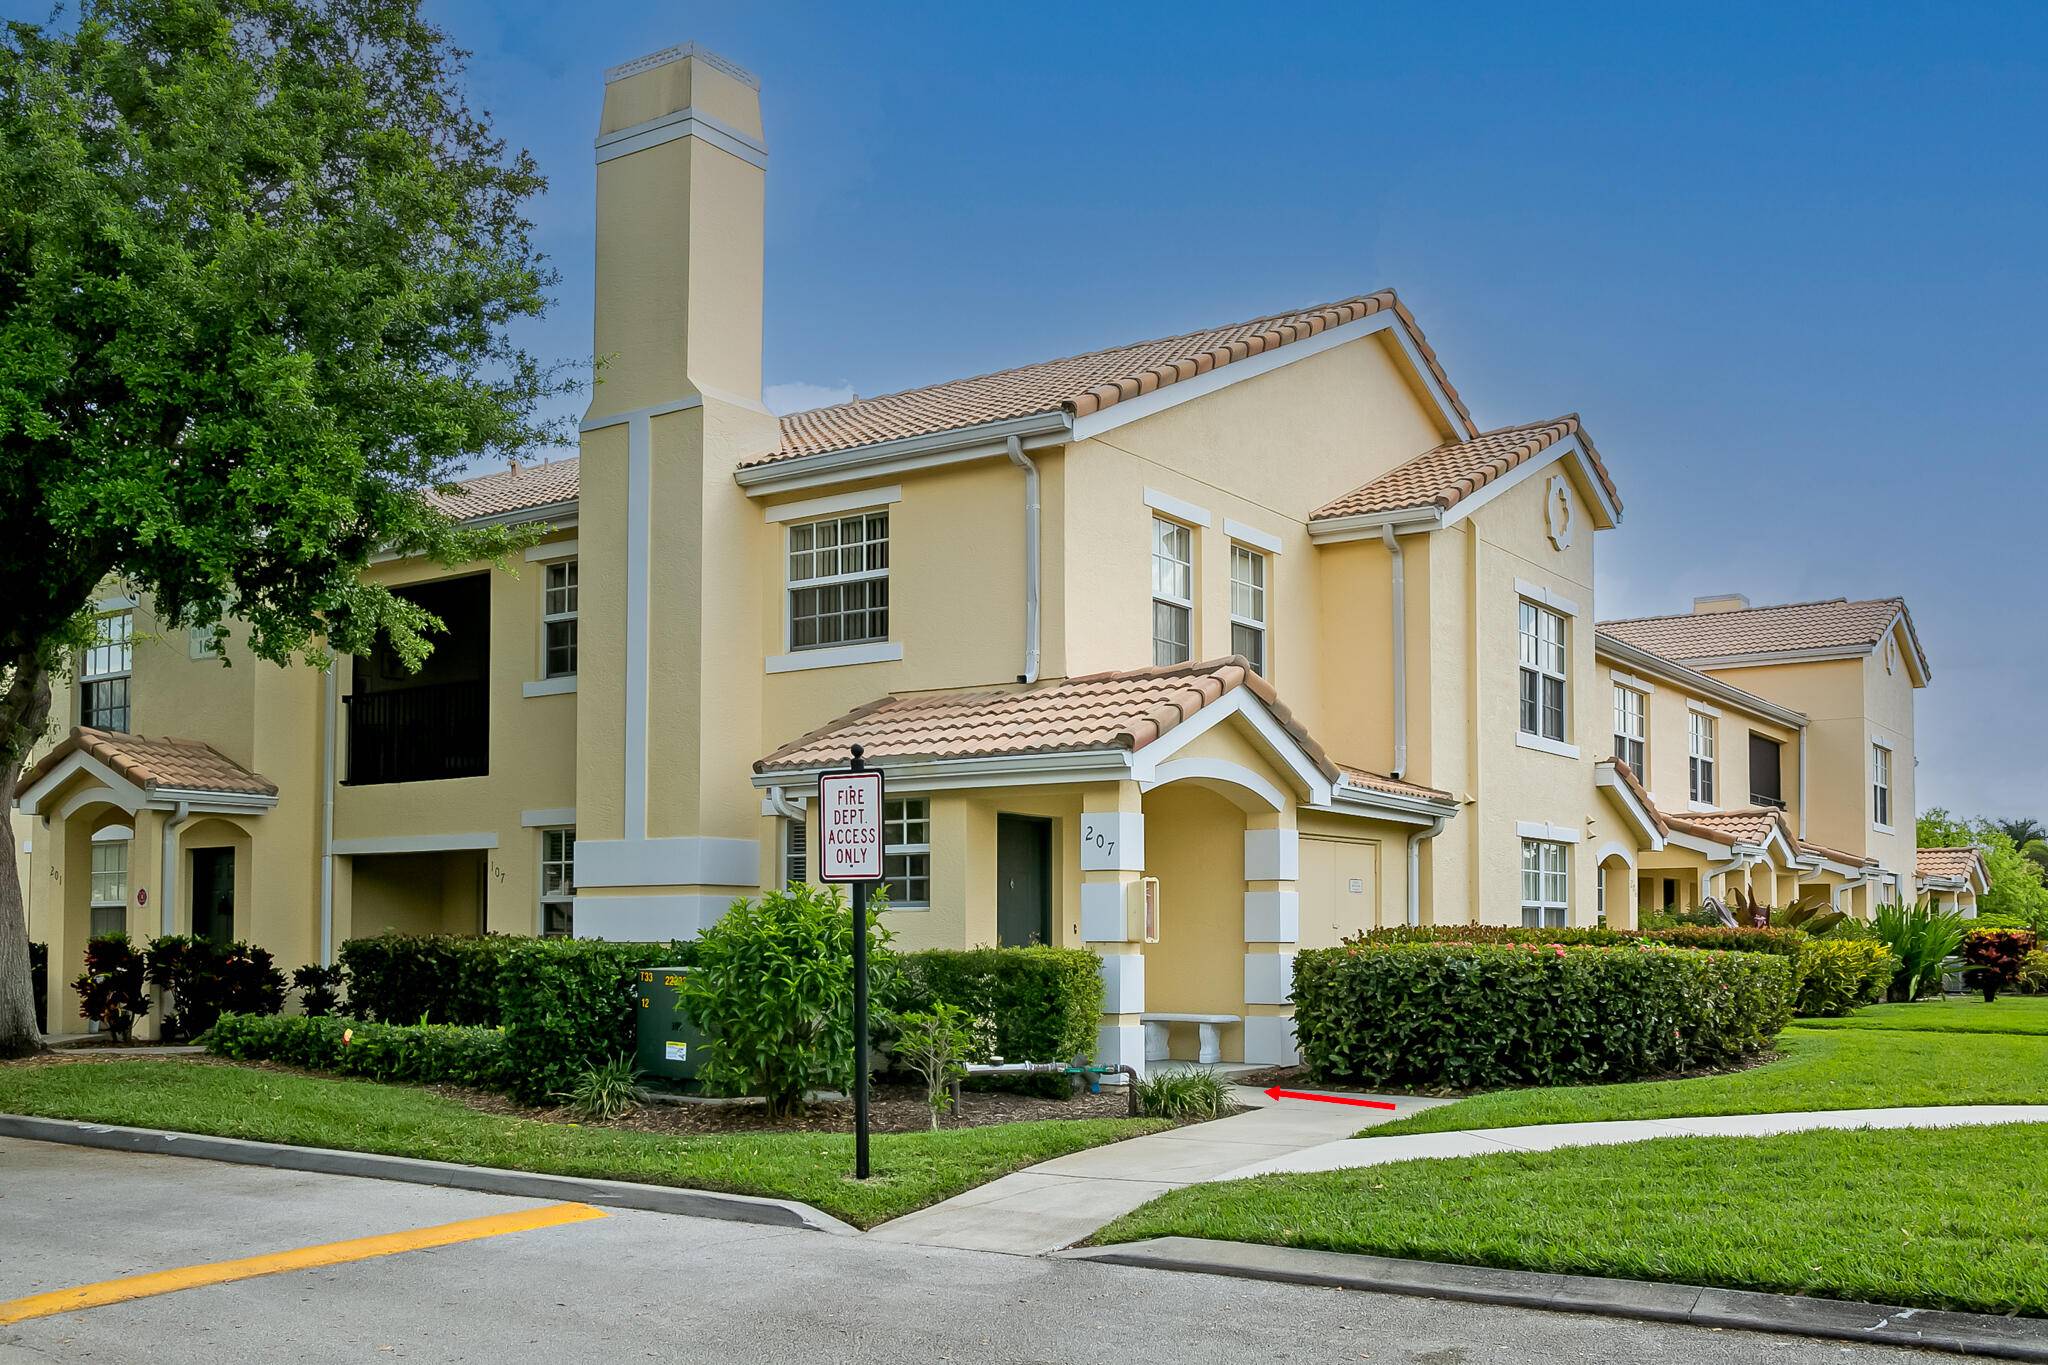 Indulge the resort style lifestyle with this 2 2 condo in desirable gated community at the Belmont at St Lucie West.